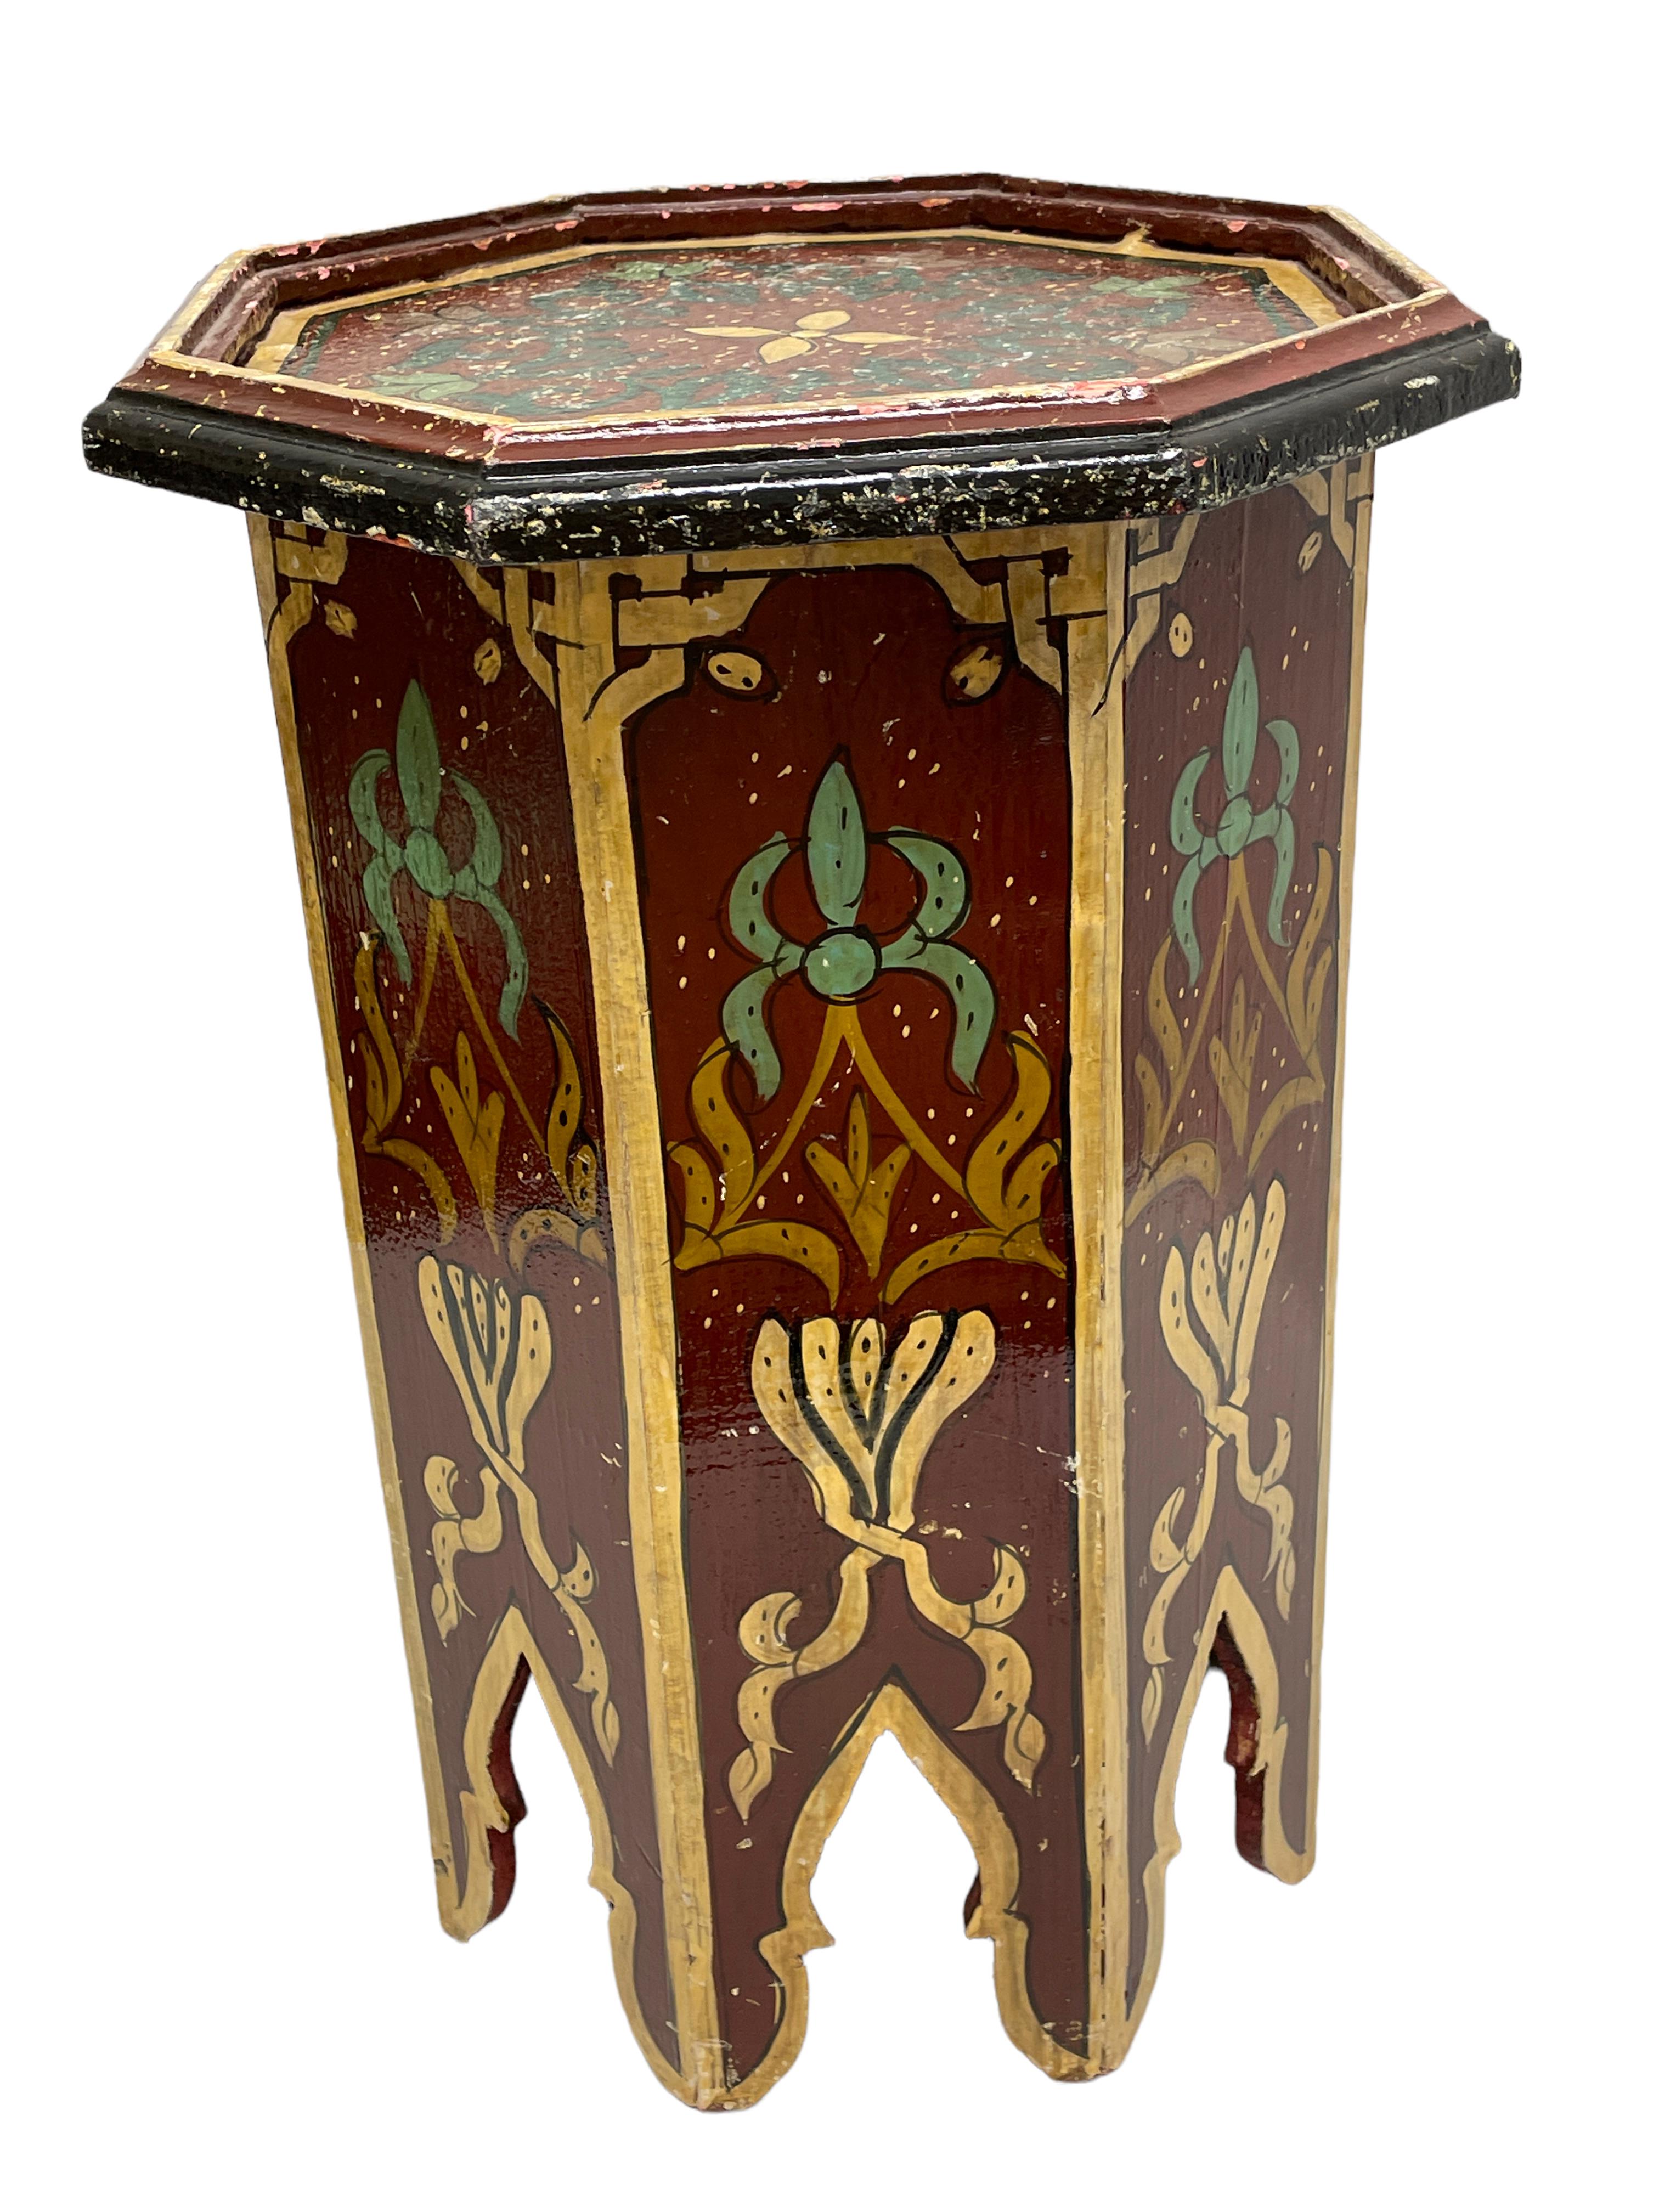 Hand-Painted Moroccan Style Diminutive Painted Hexagonal Table